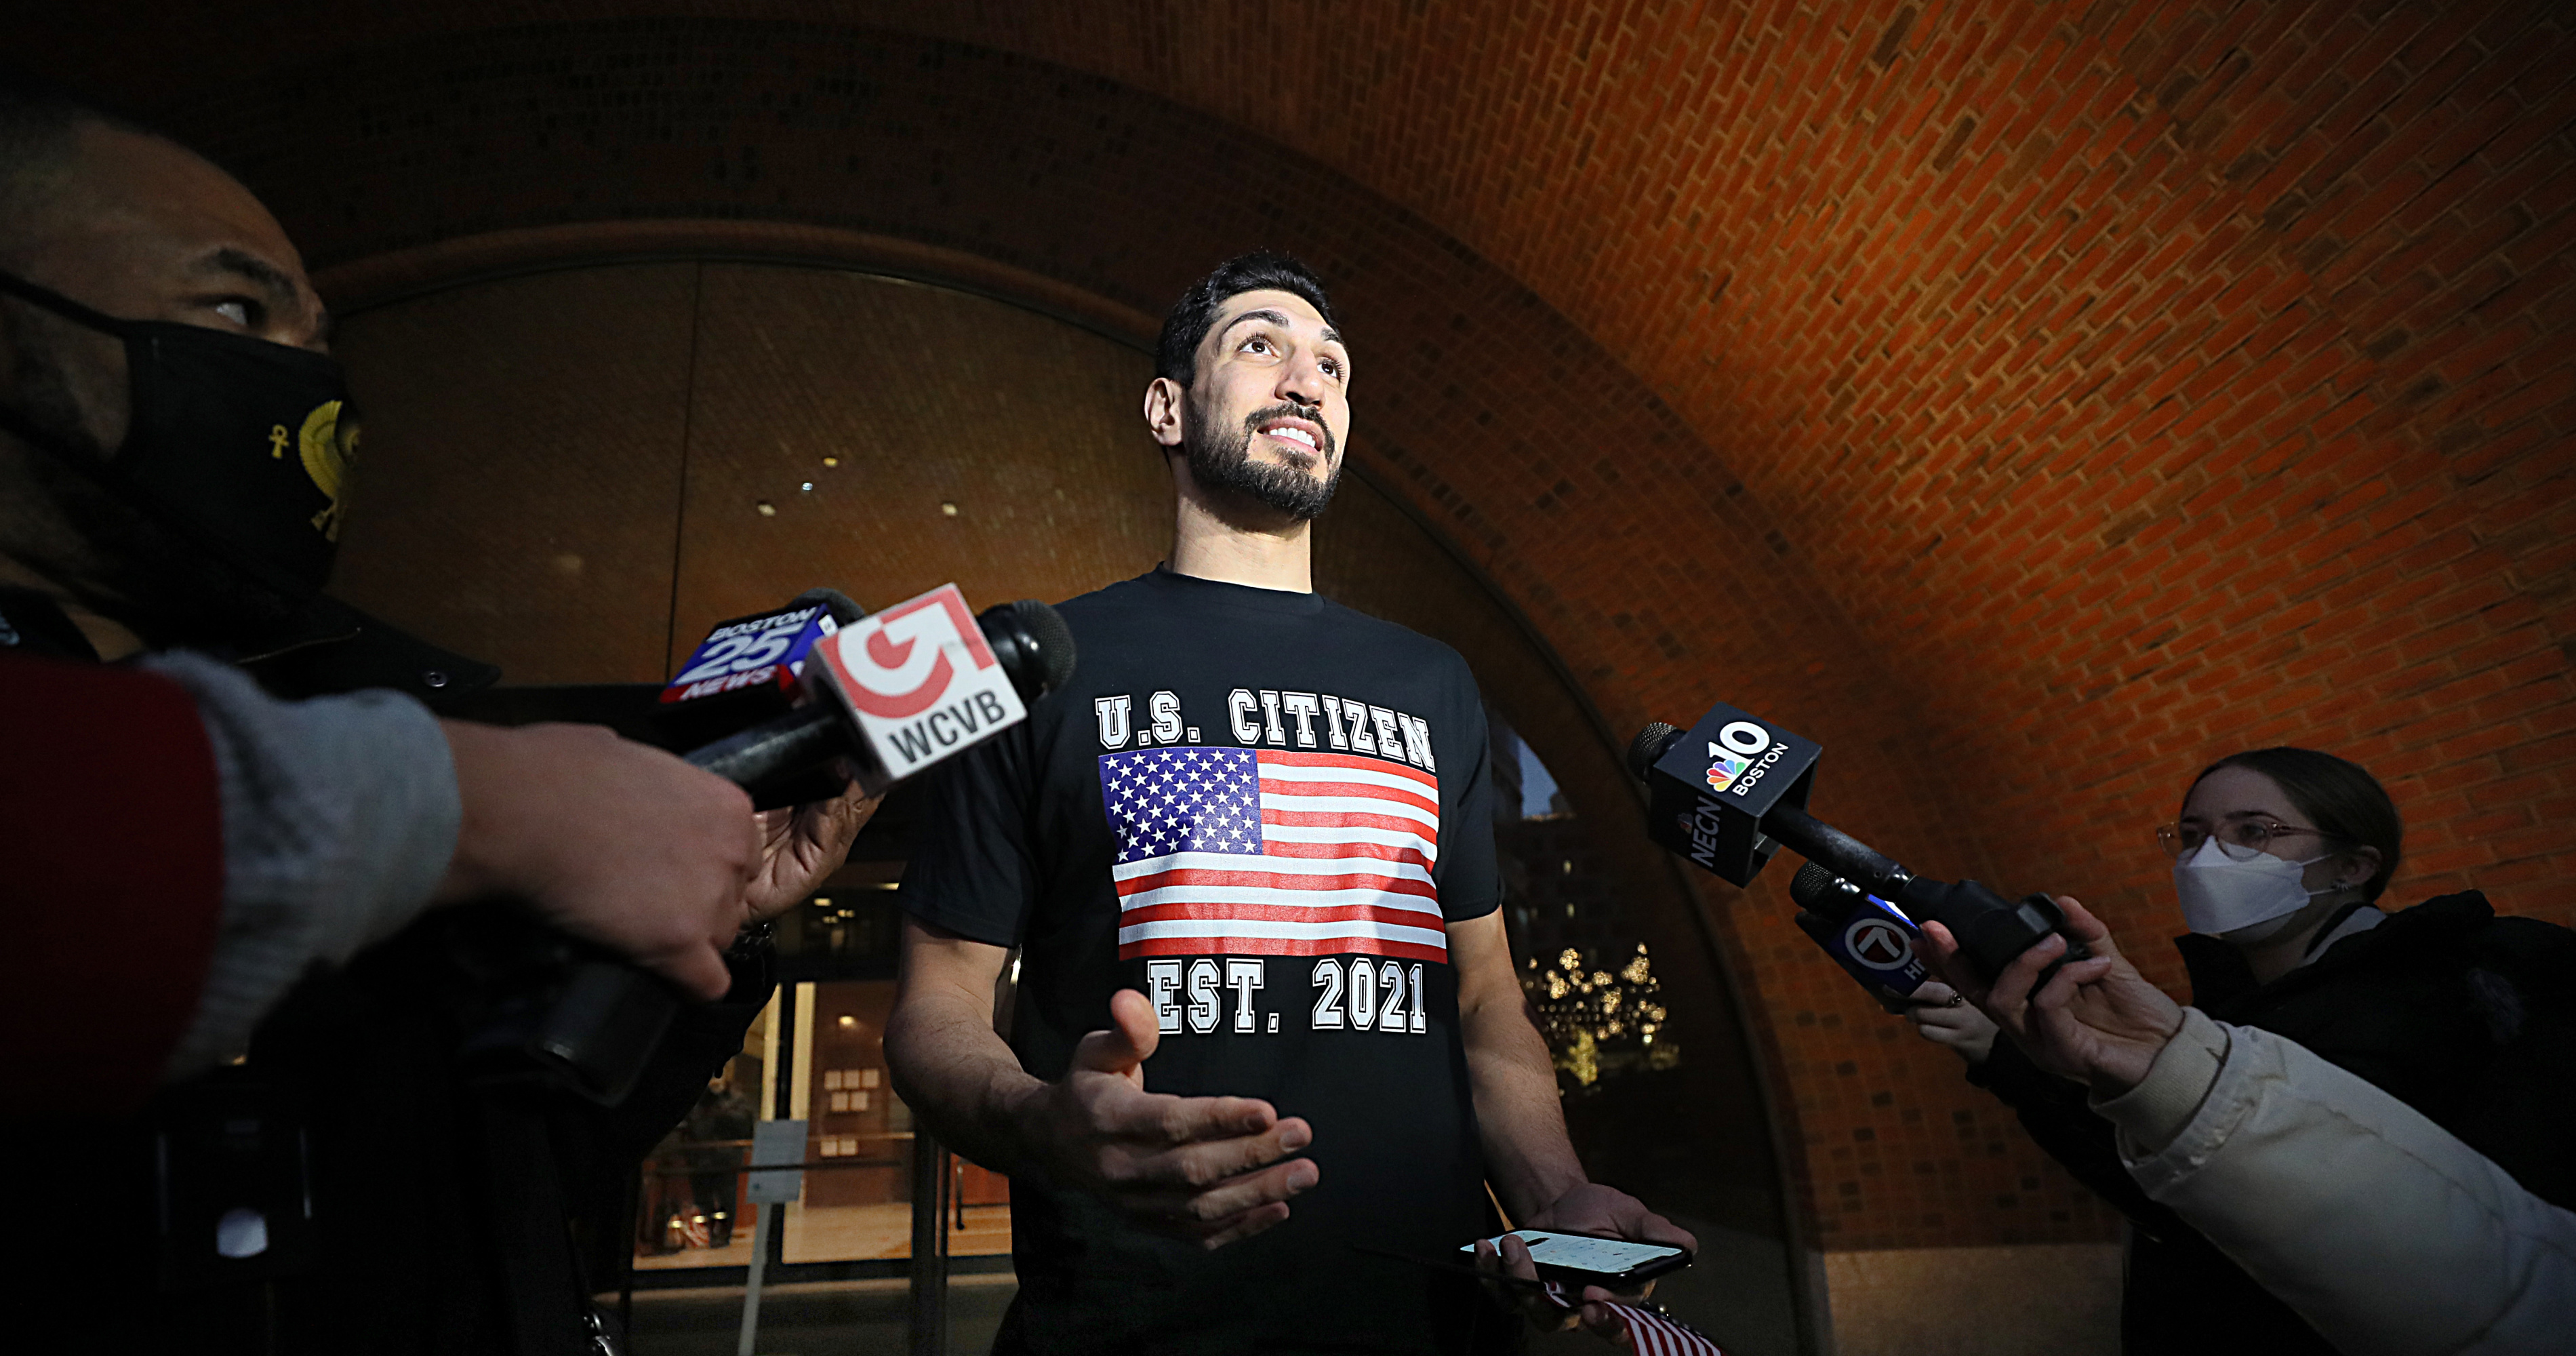 Thunder's Enes Kanter released after being detained at Romanian airport